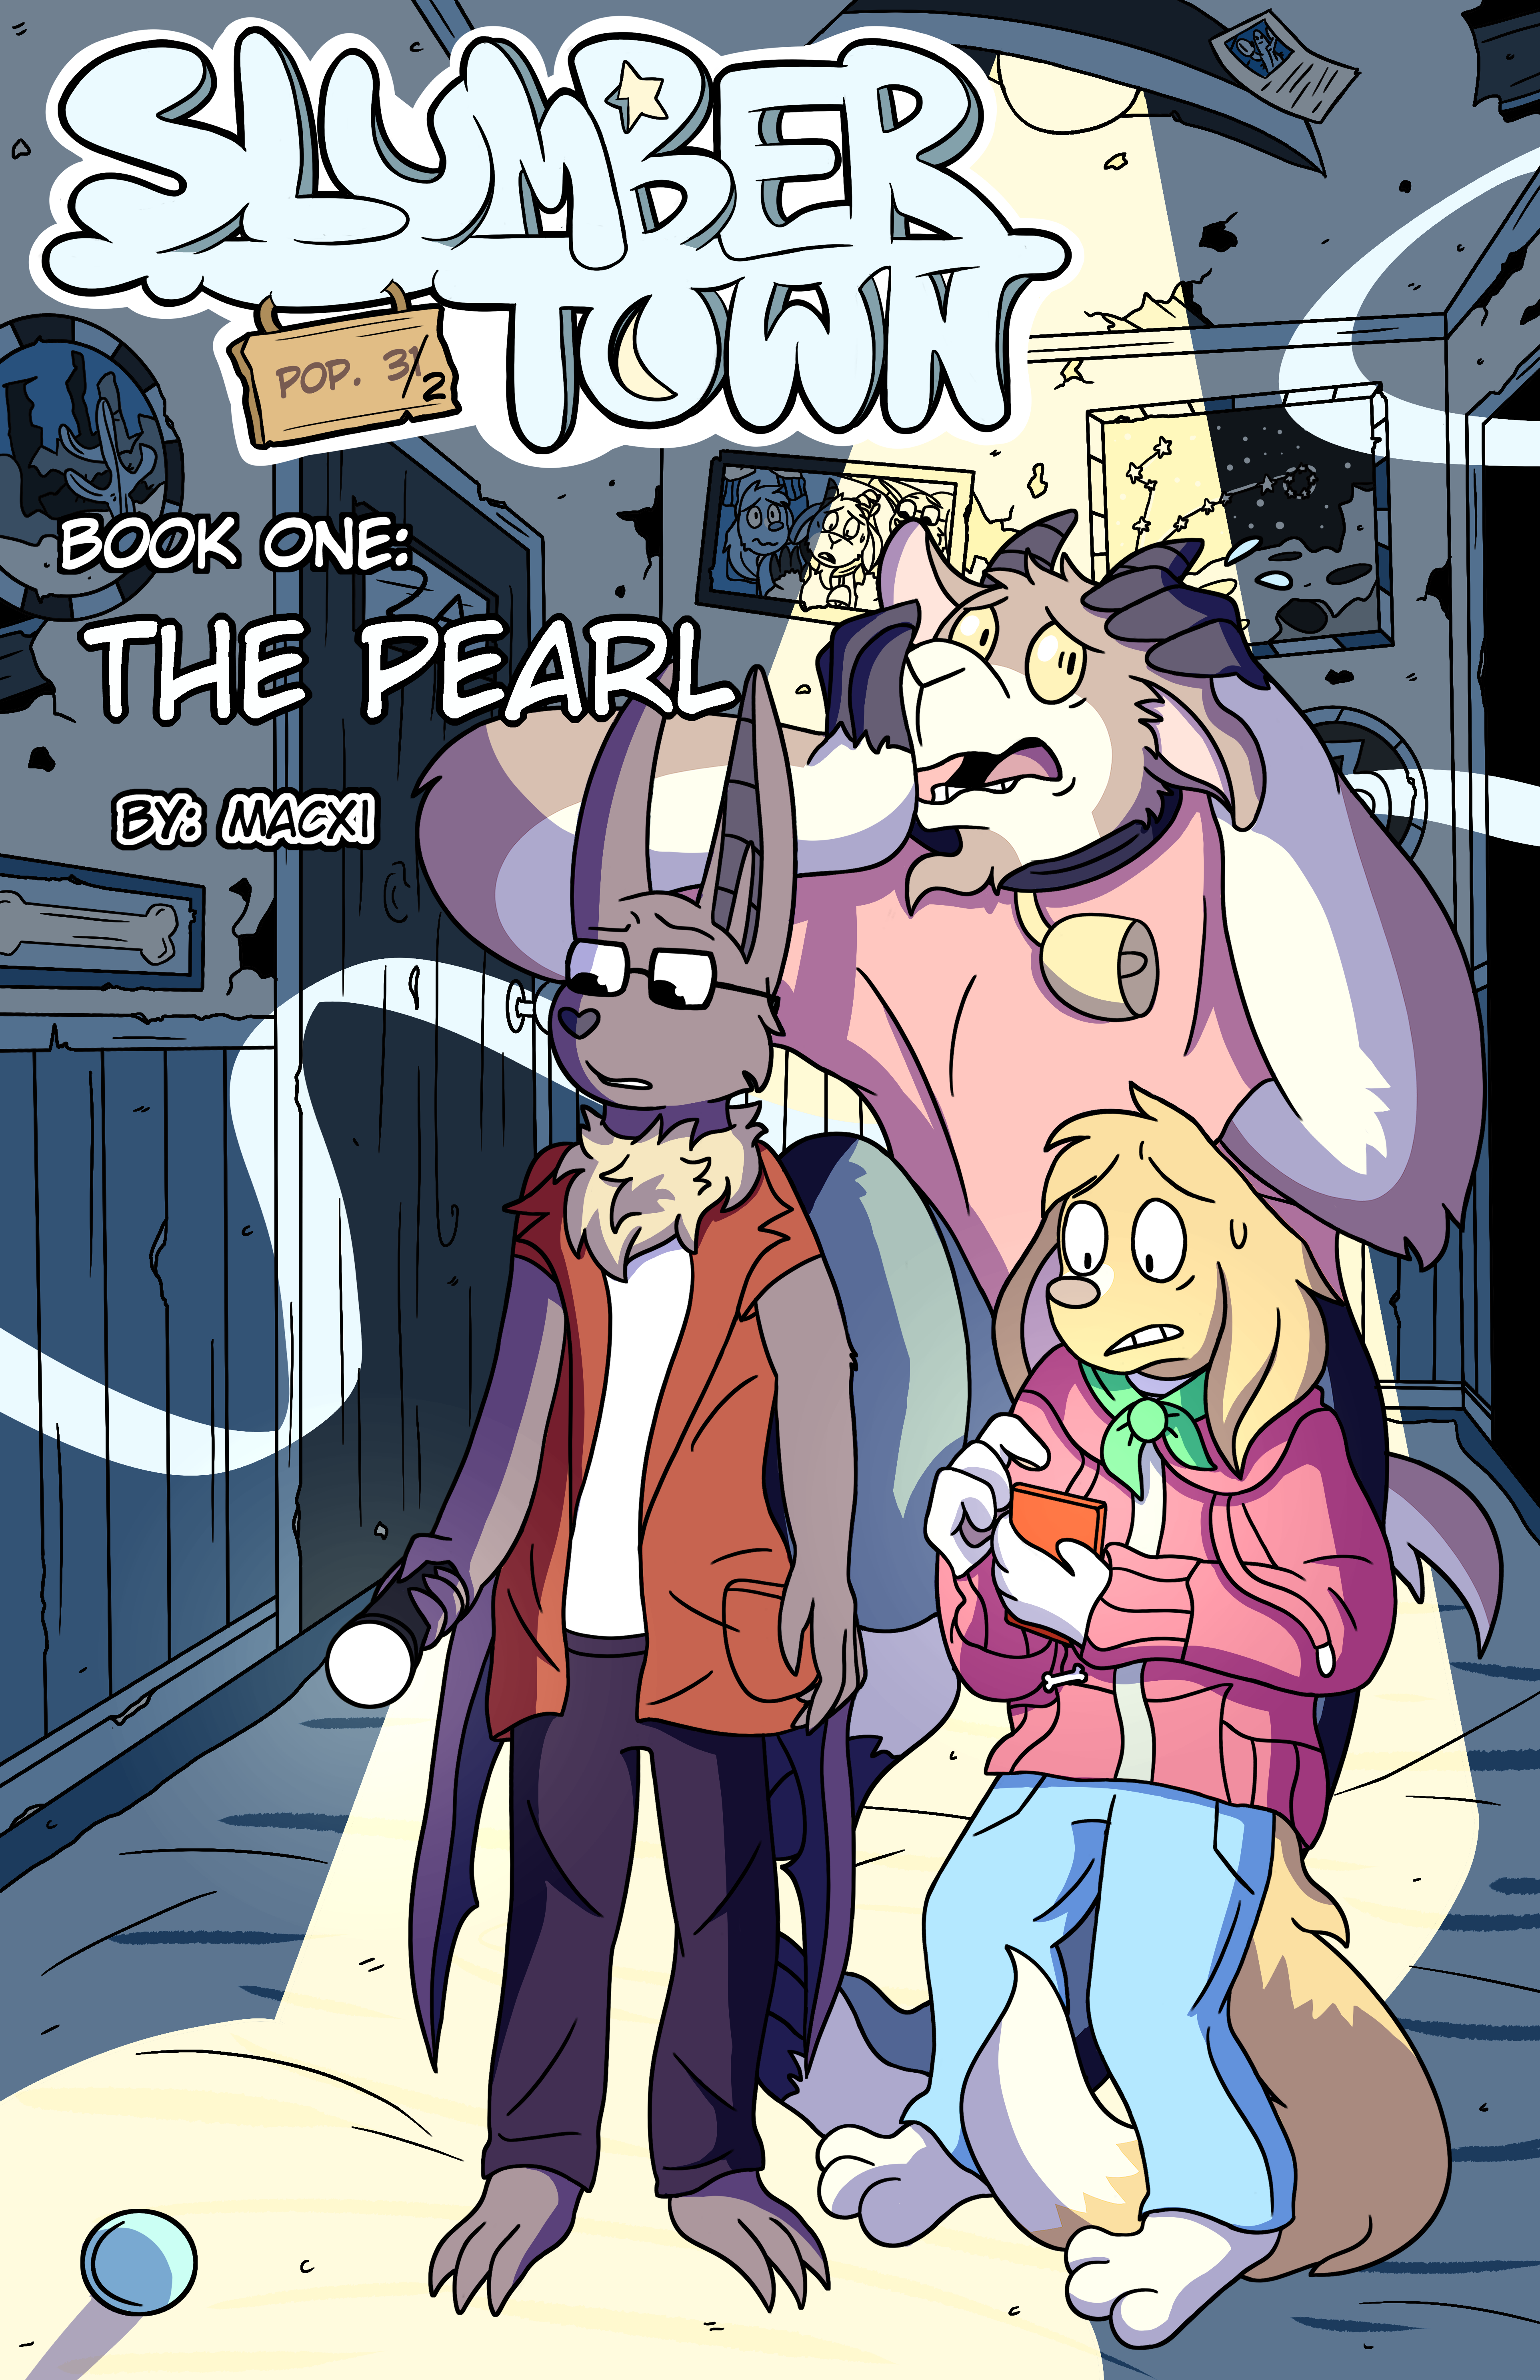 Book 1: The Pearl